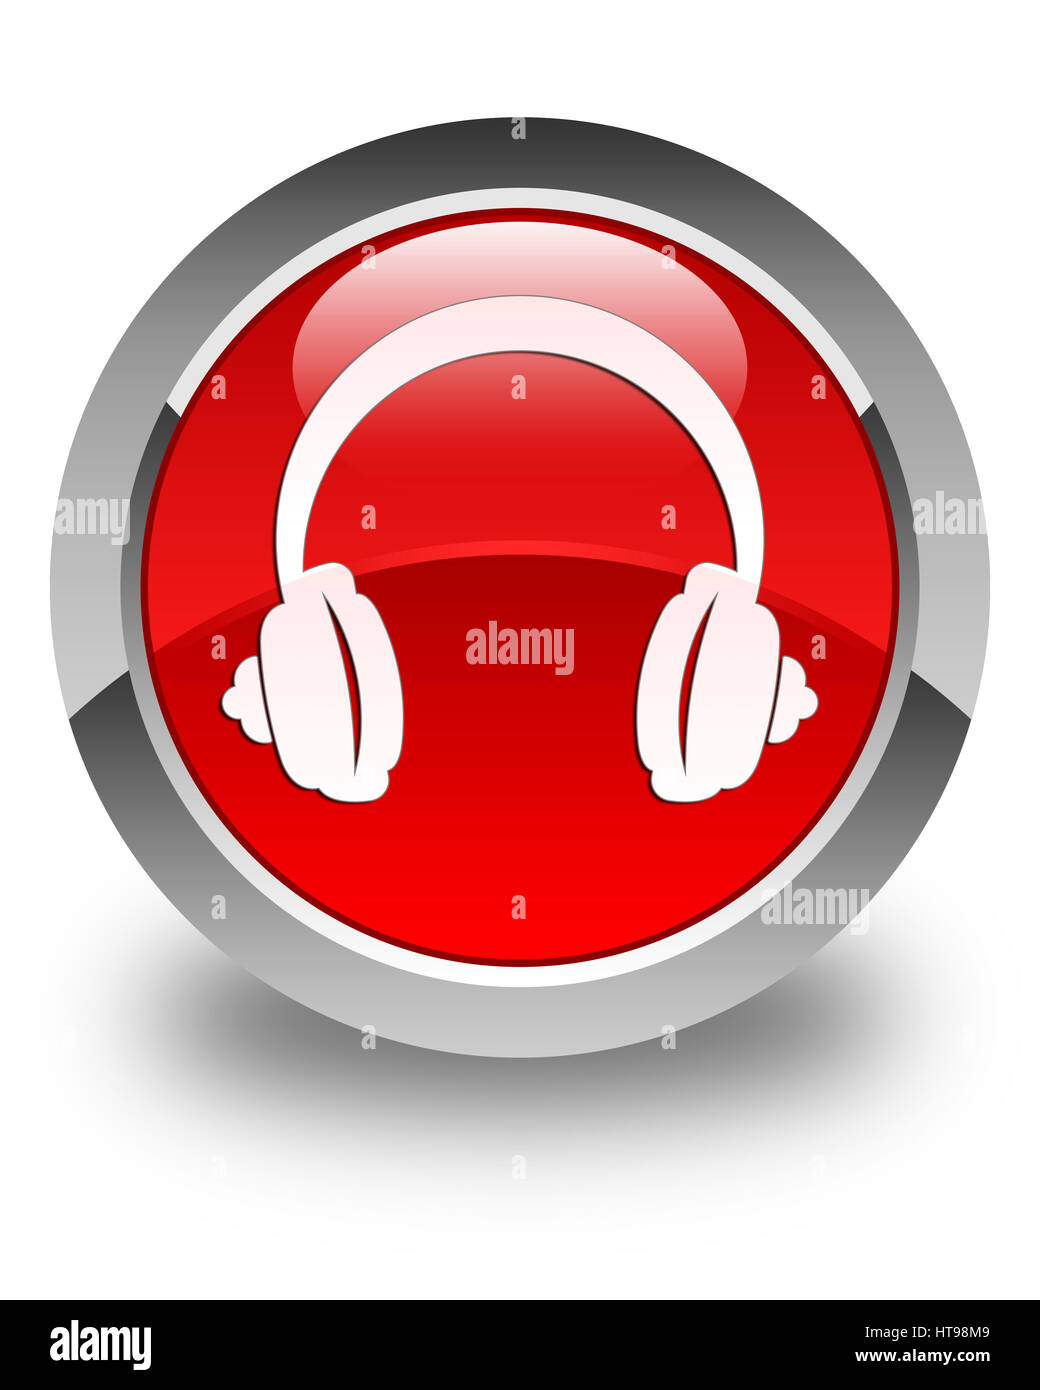 Headphone icon isolated on glossy red round button abstract illustration Stock Photo